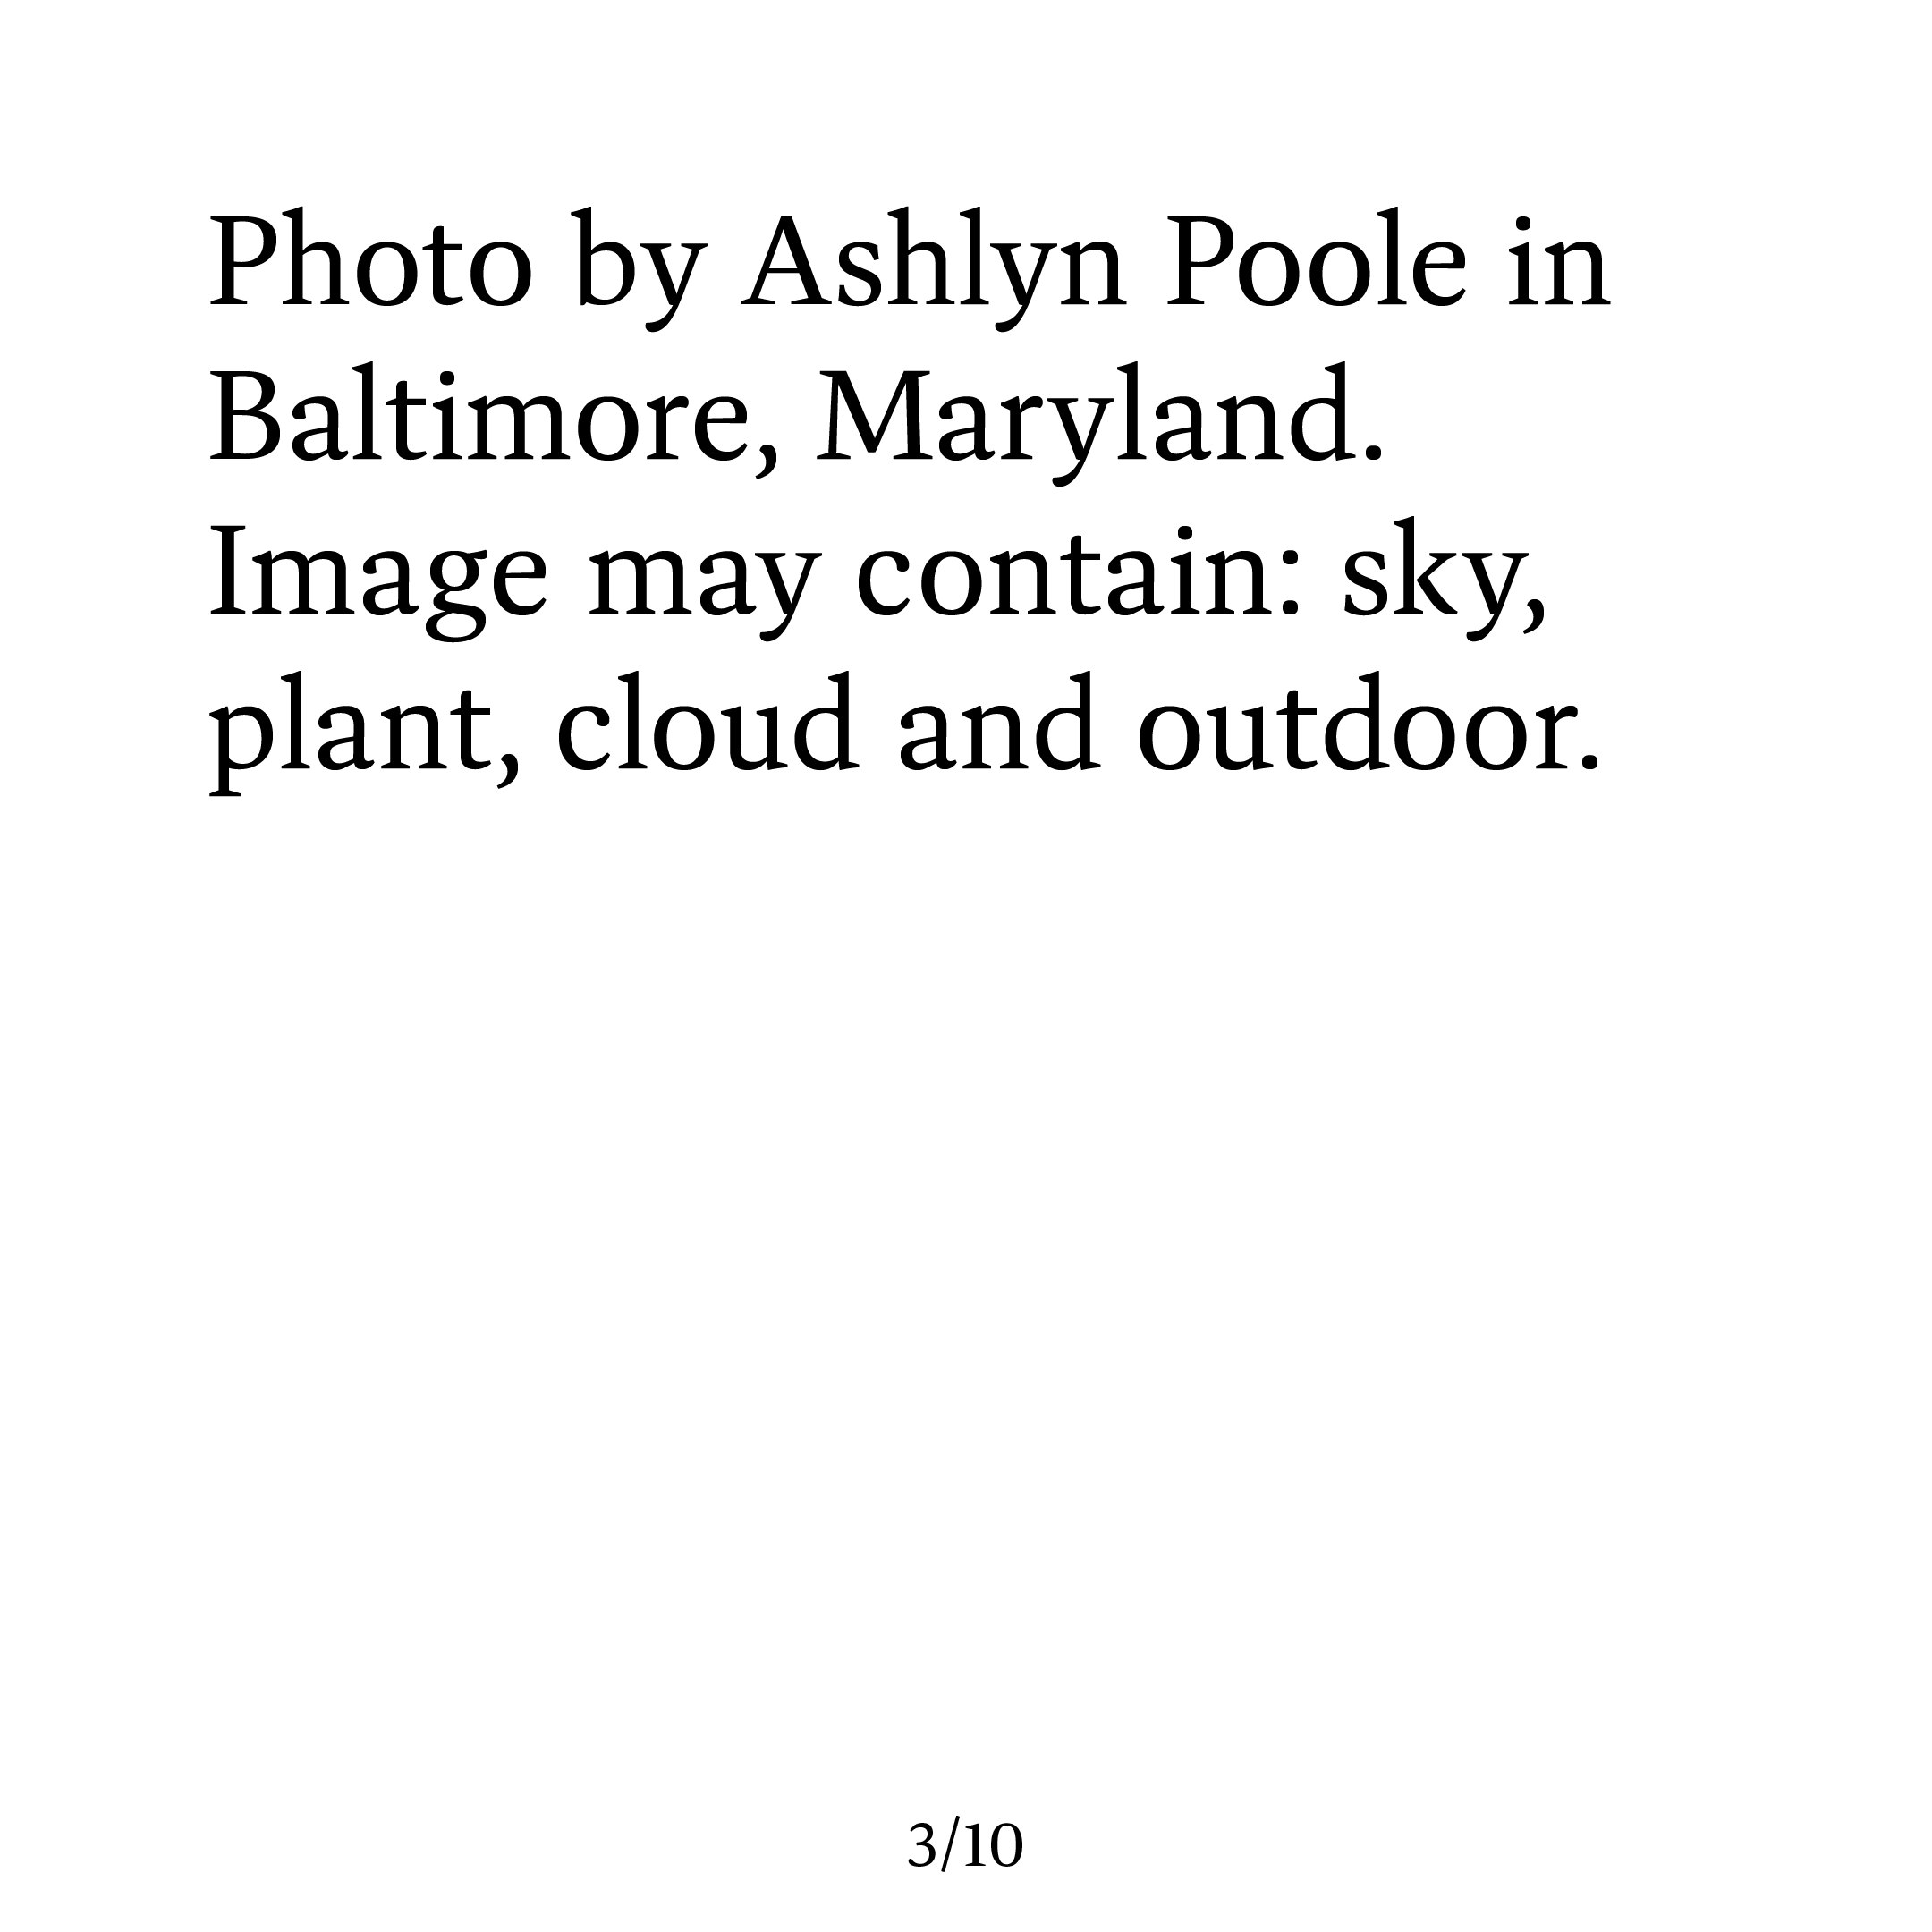 The same slide as the first one, but instead of a nice pre-written description it shows the default alt text for that post, which is (unfortunately) 'Photo by Ashlyn Poole in Baltimore, Maryland. Image may contain: sky, plant, cloud and outdoor.'